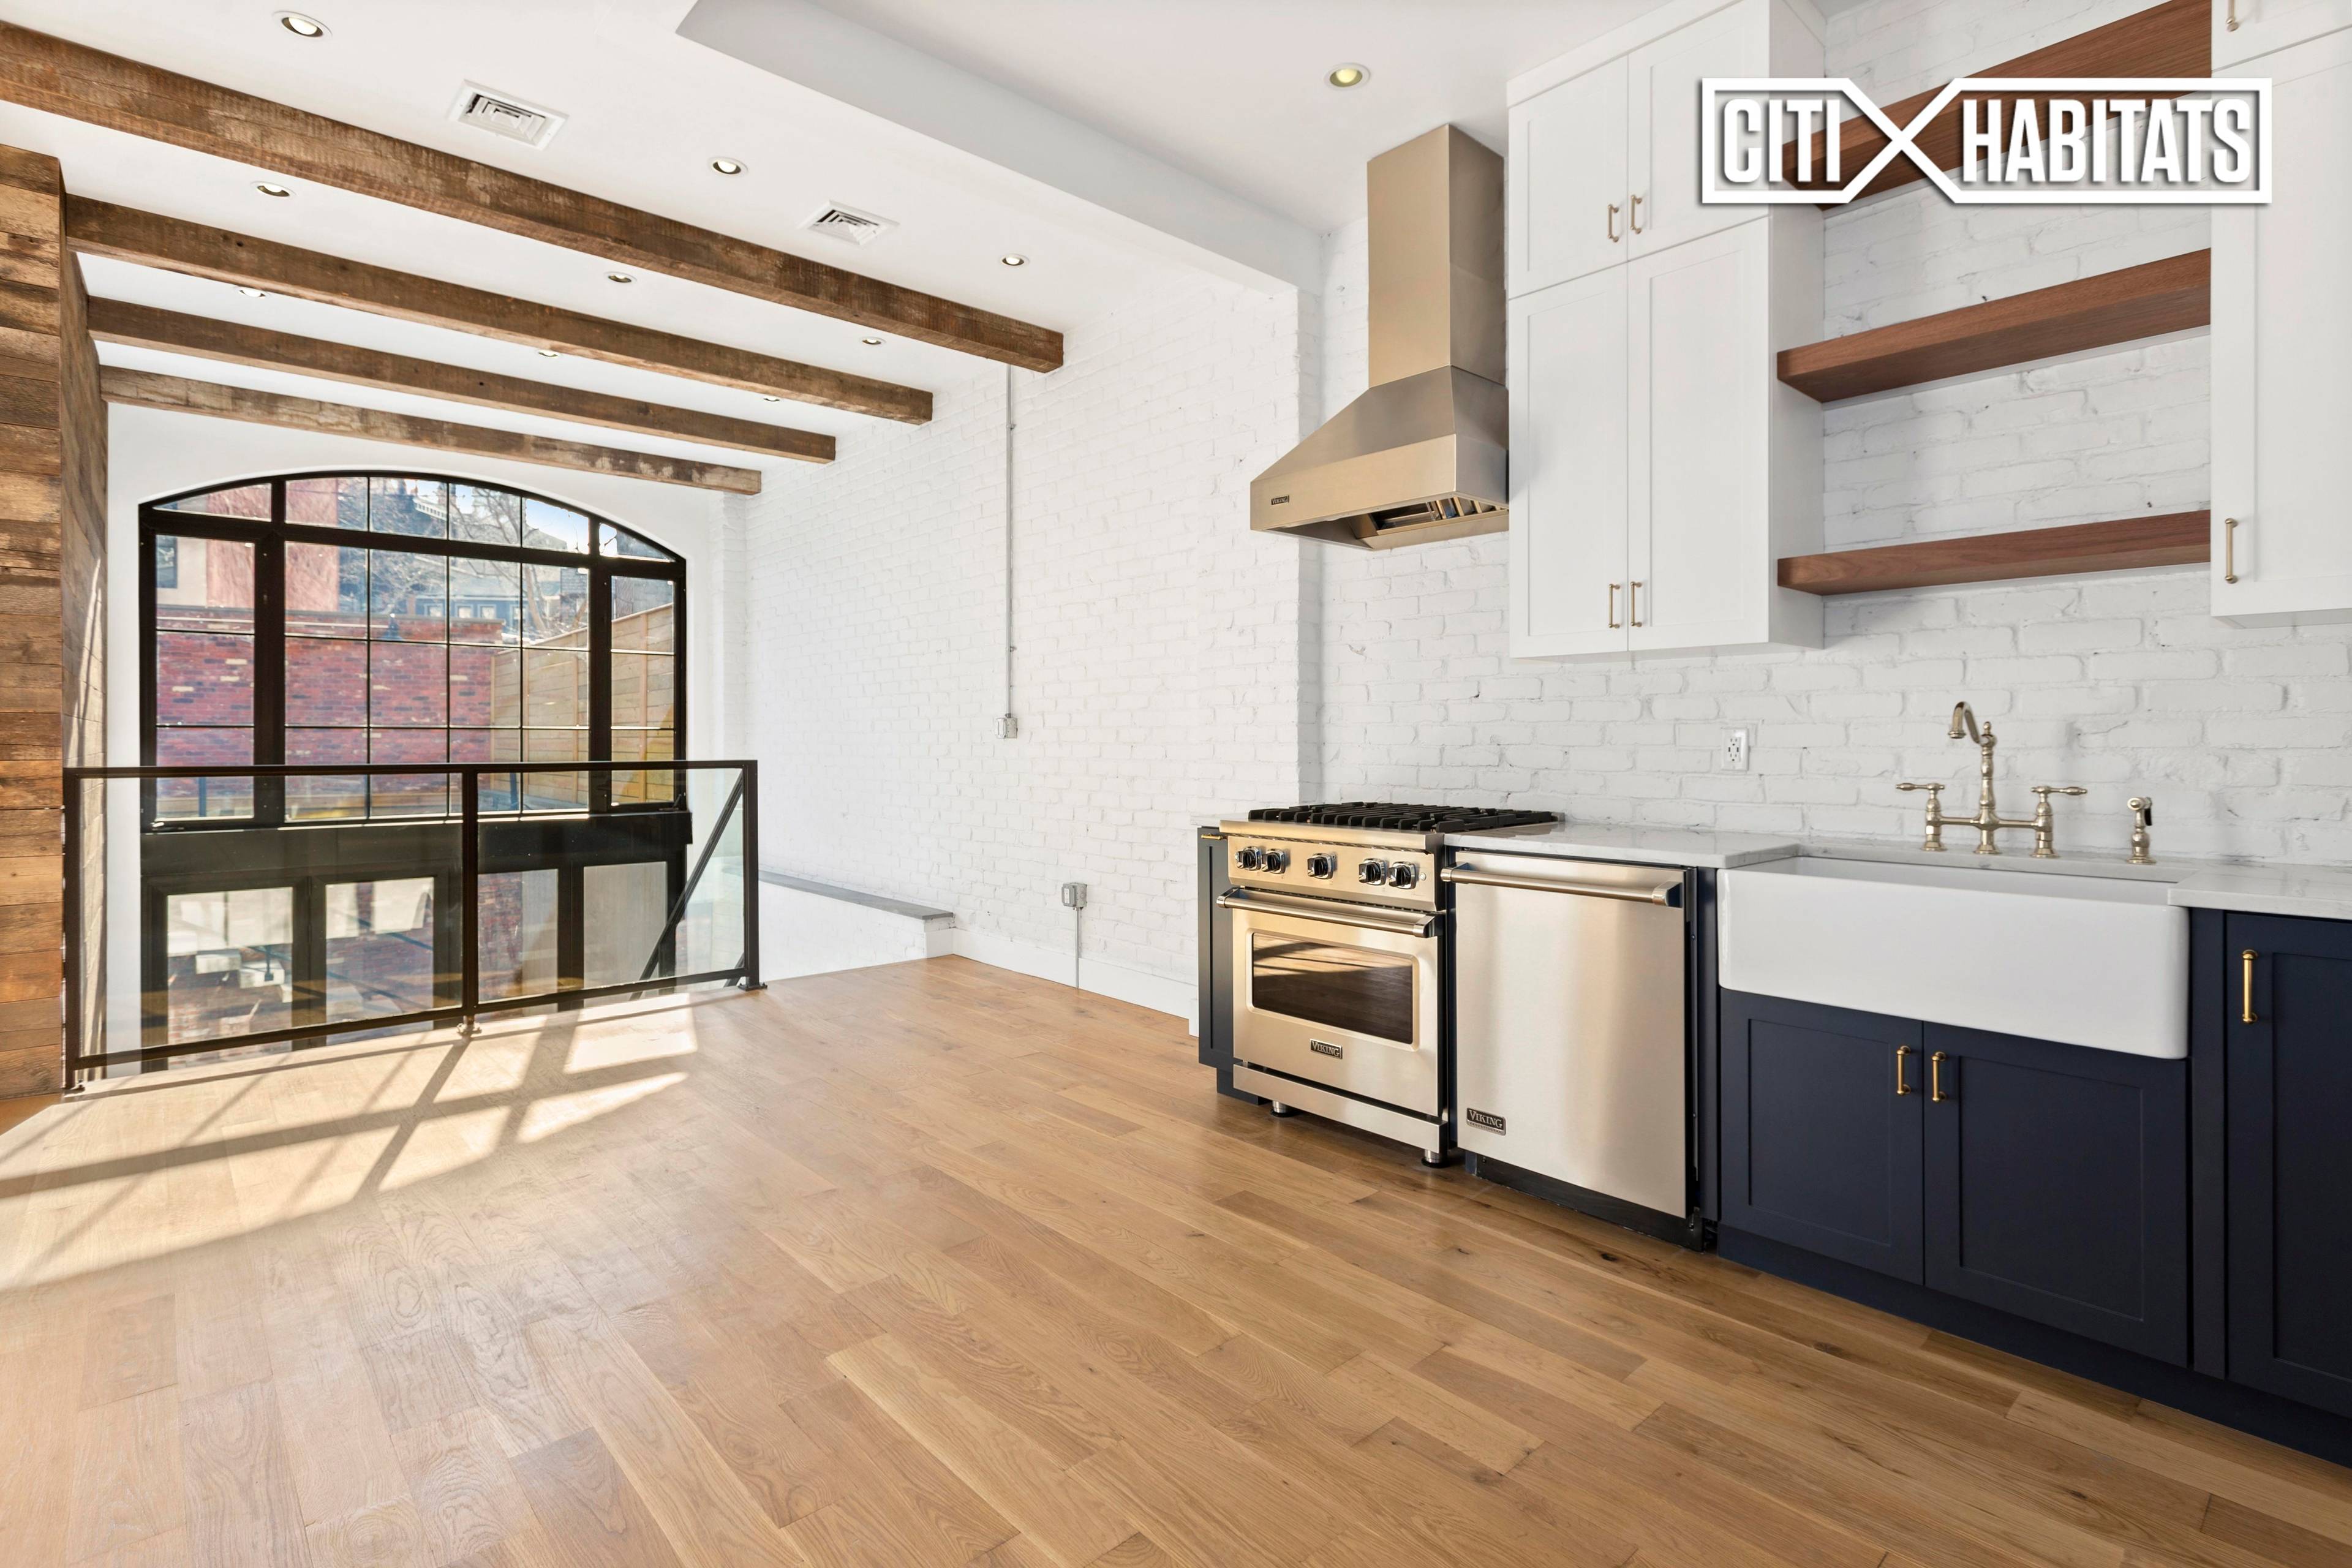 Sales have launched at 34 Maspeth Avenue, a new luxury boutique condominium located in trendy Williamsburg, Brooklyn.